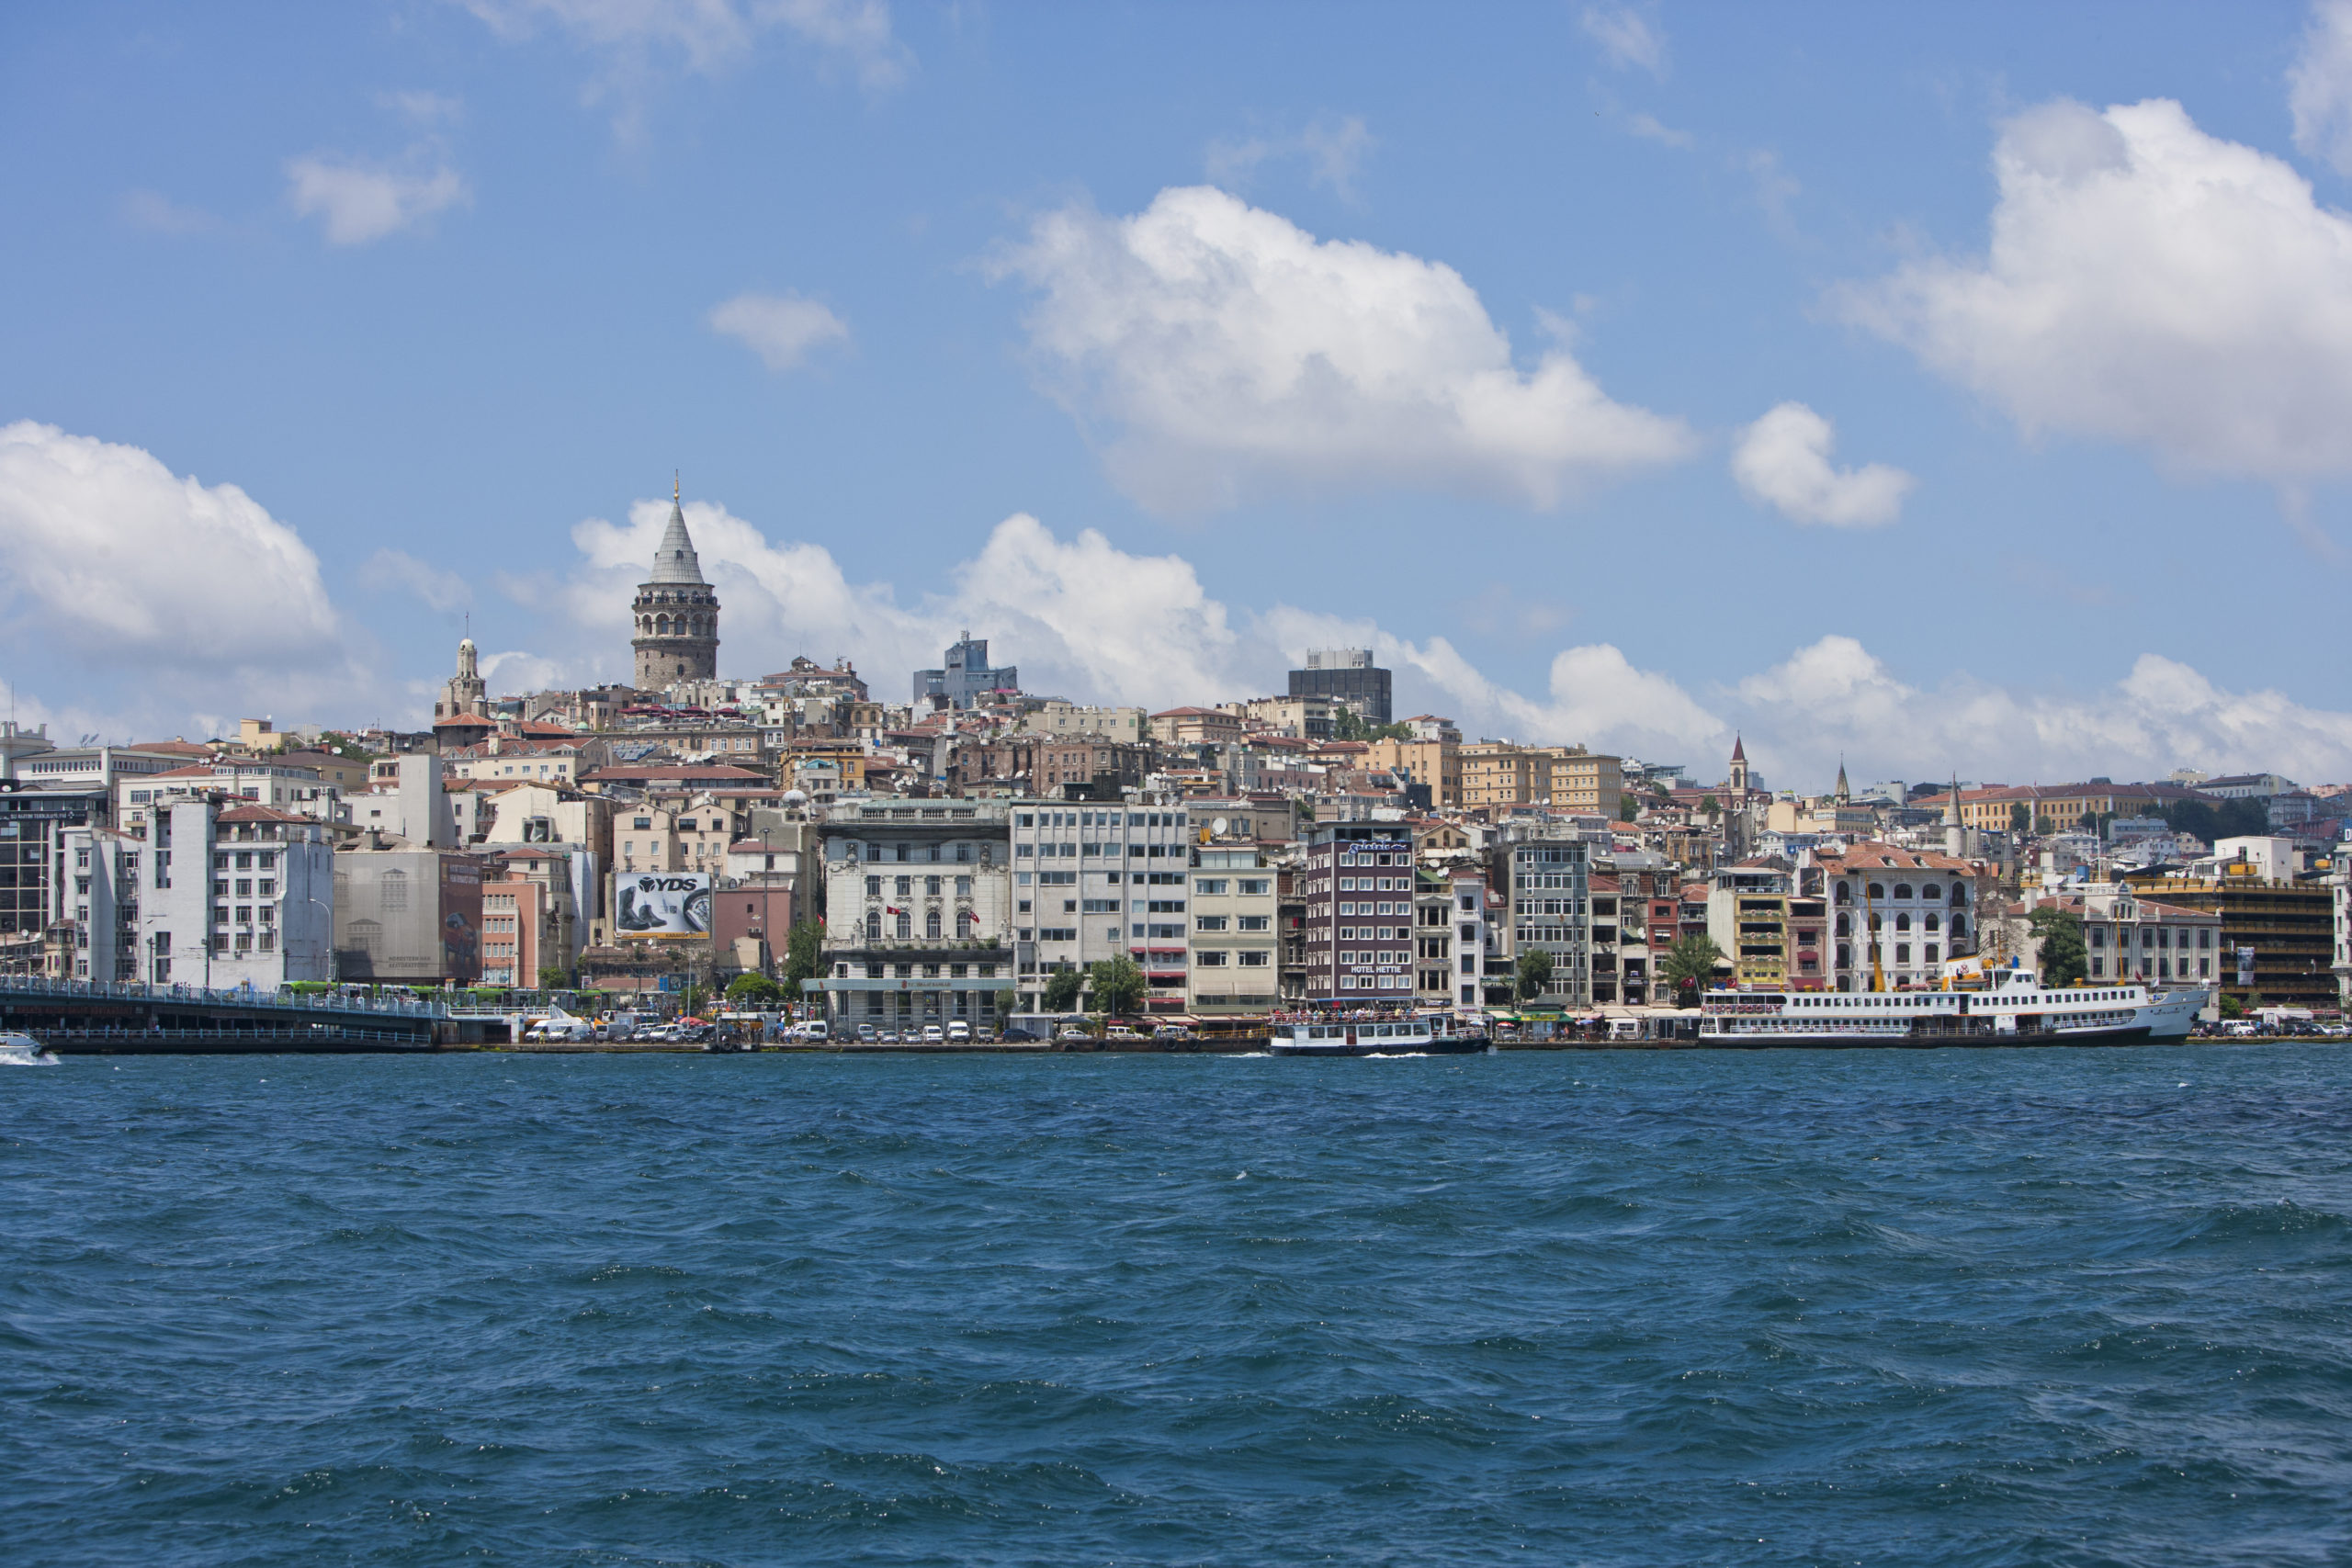 The city of Istanbul